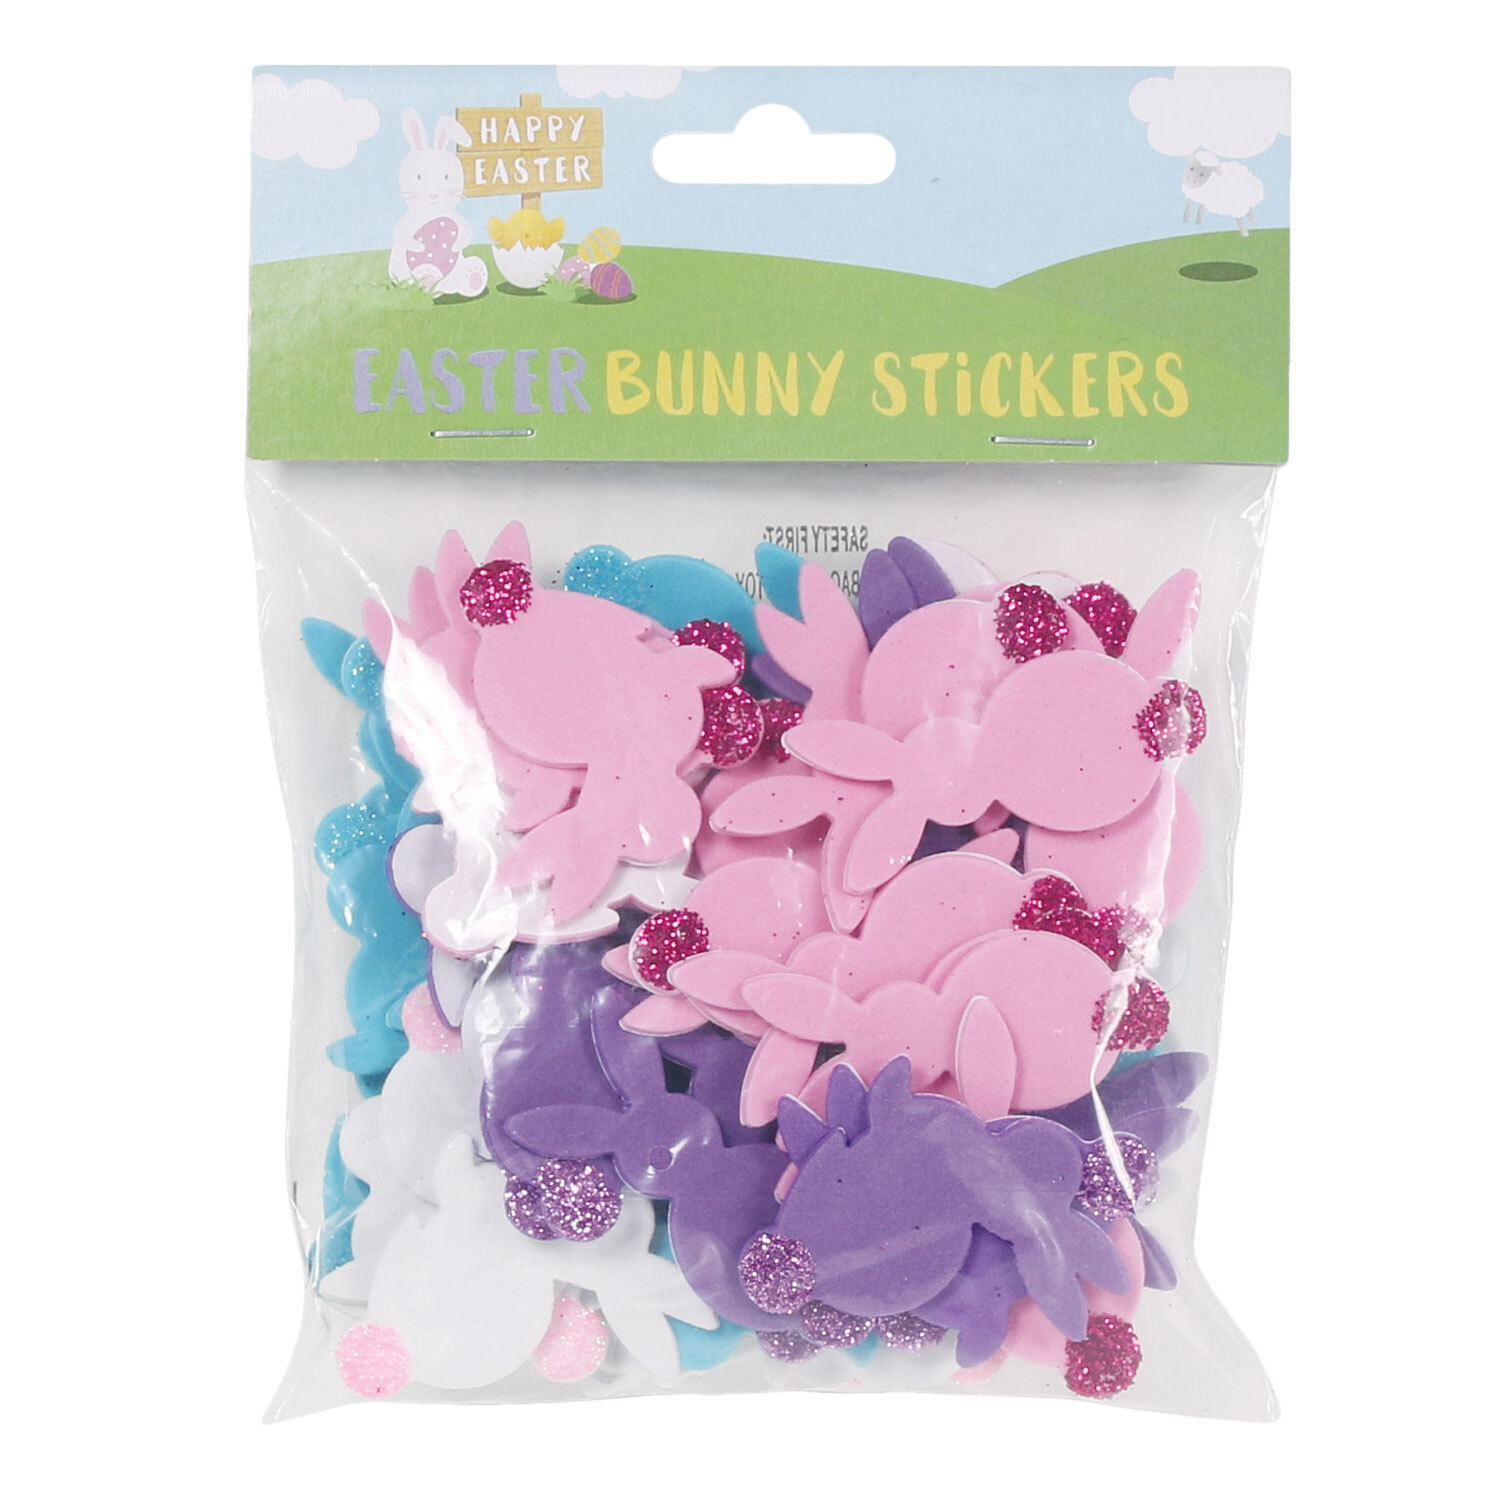 Easter Bunny Stickers Image